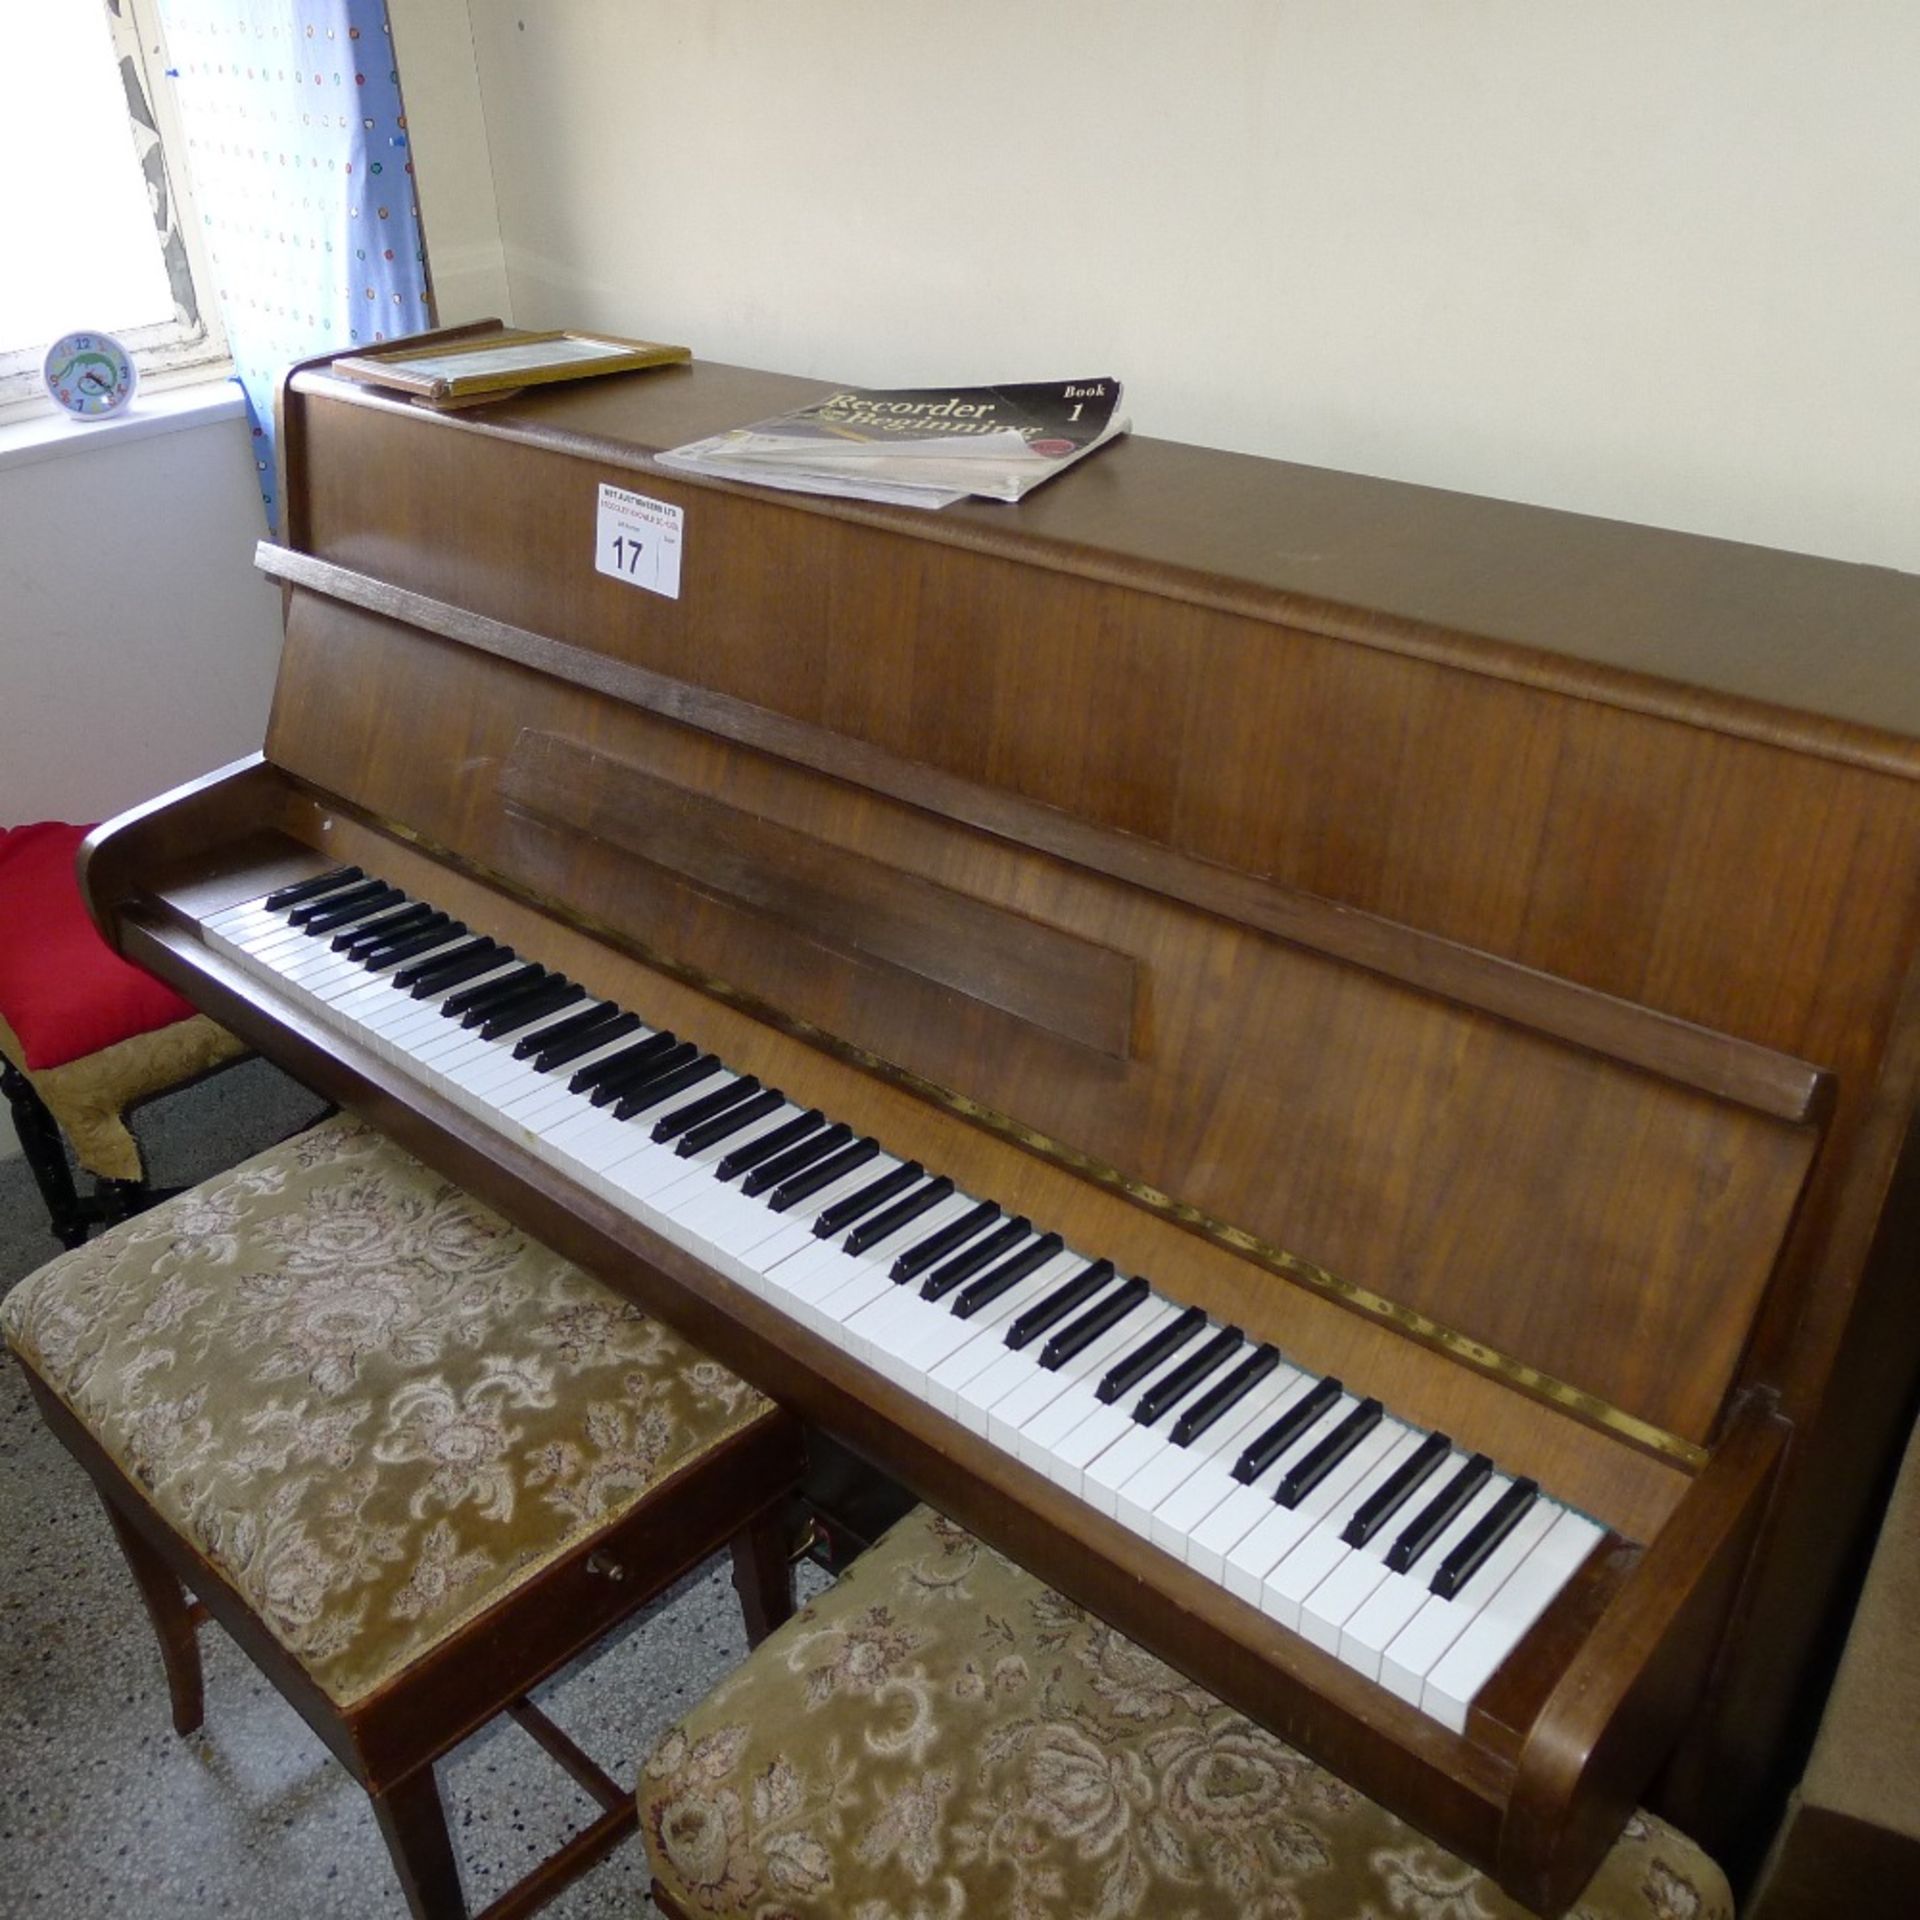 1 wooden cased upright piano (make not visible) (located in junior school first floor)